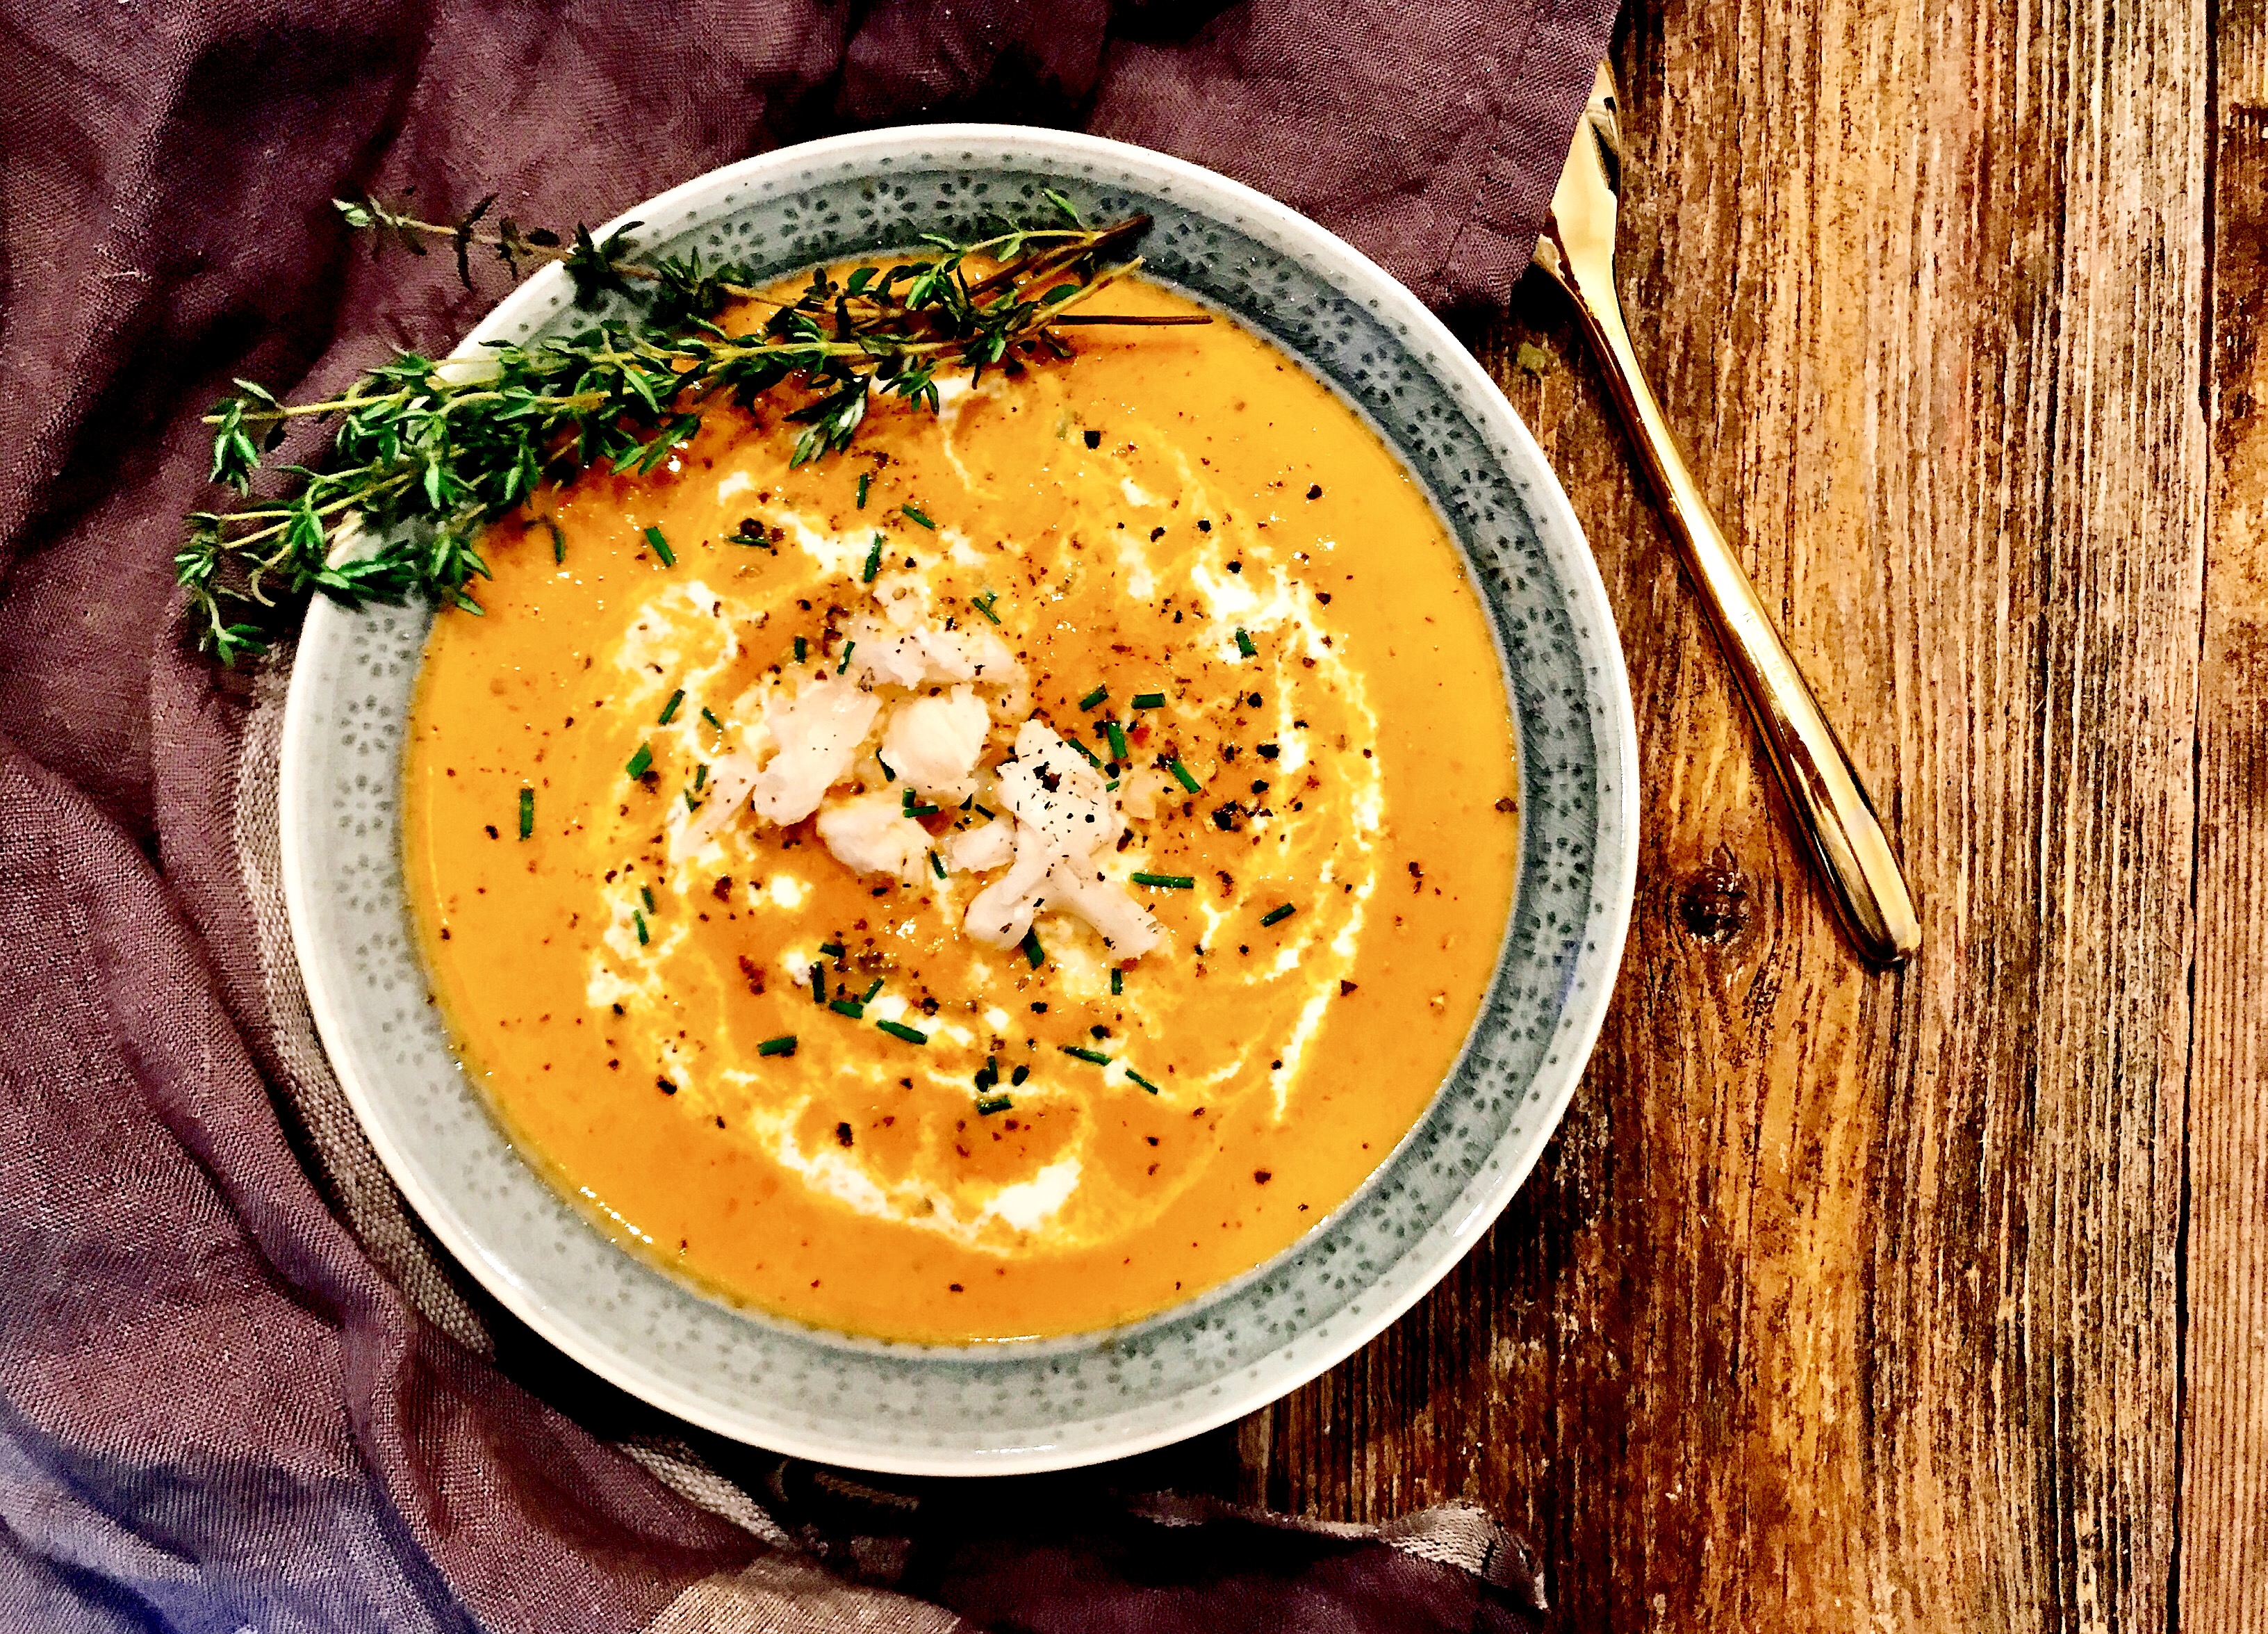 http://ahintofwine.com/wp-content/uploads/2017/11/Creamy-Lobster-Bisque-with-Sherry-and-Thyme.jpg